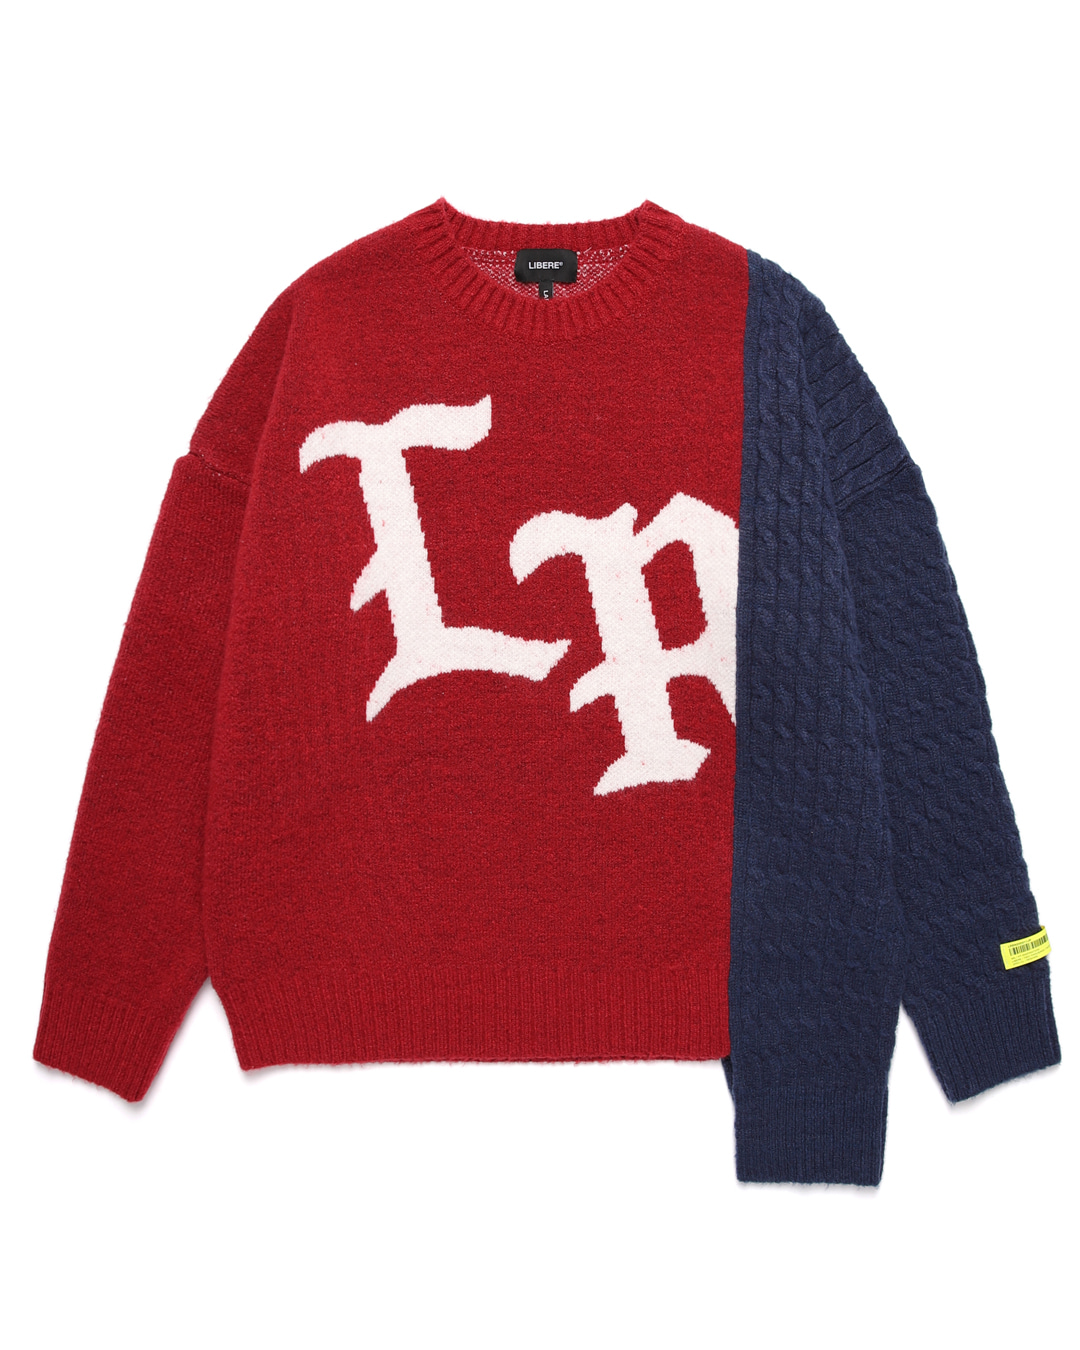 TWOFACE KNIT SWEATER / RED,BTS,JAPAN,FASHIONBRAND,LIBERE